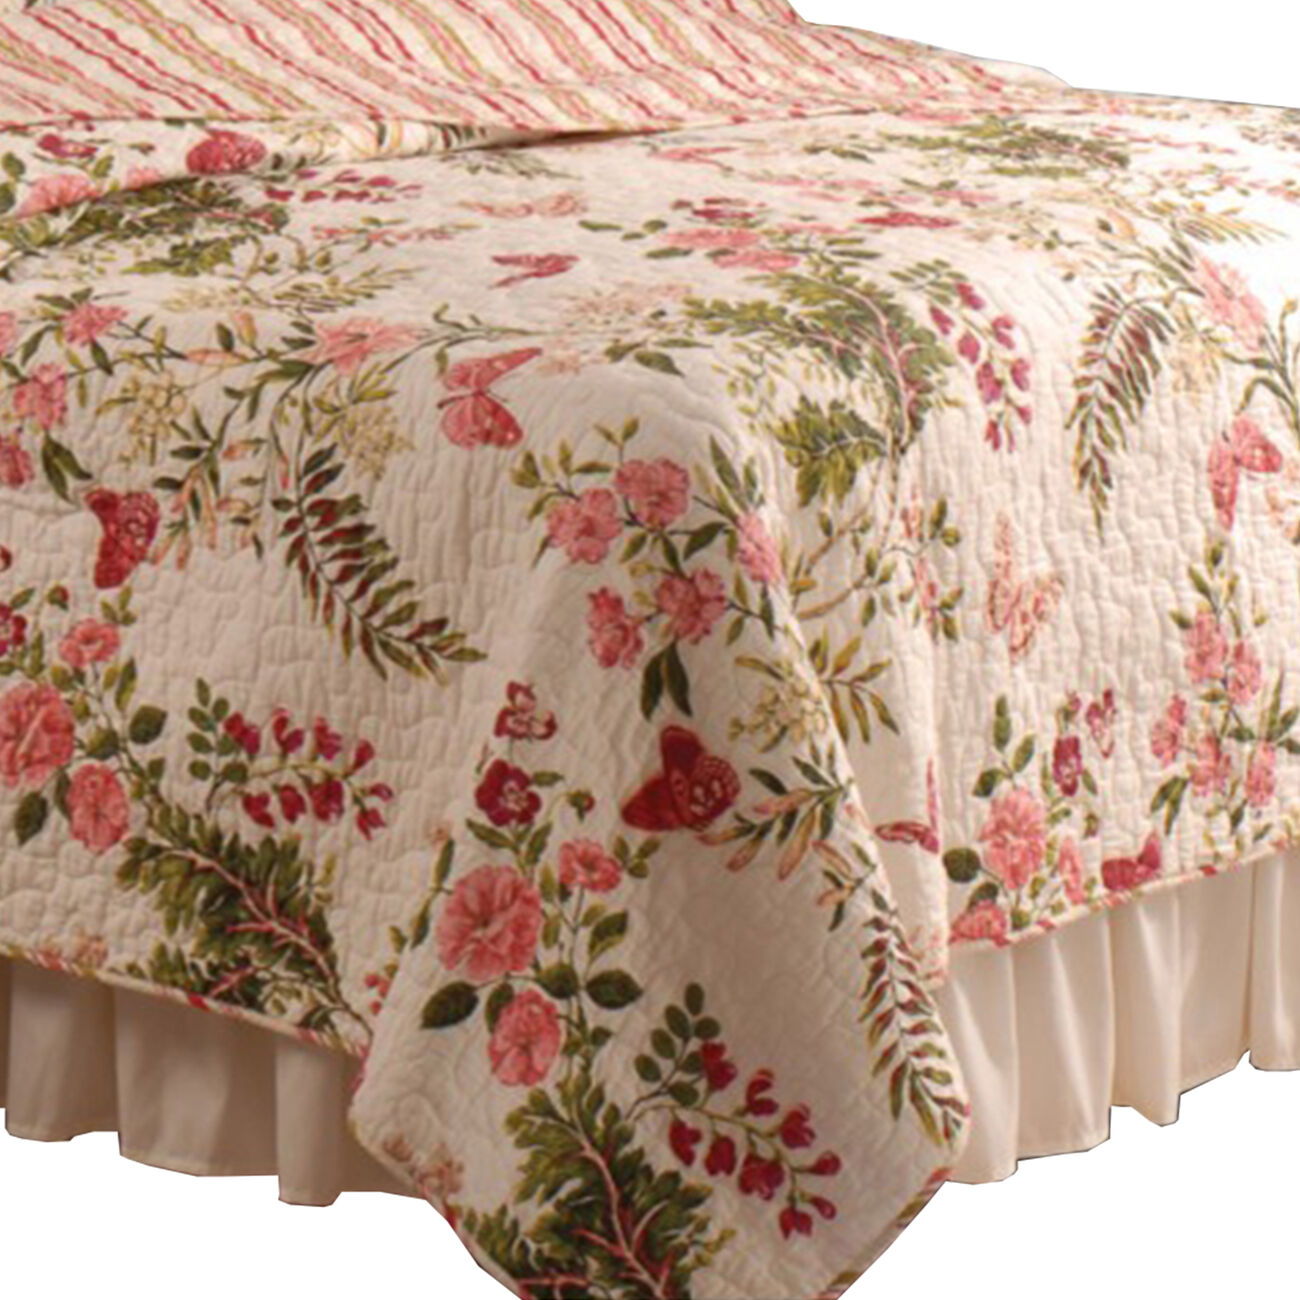 Atlanta Fabric 3 Piece Queen Size Quilt Set with Butterfly Print,Multicolor